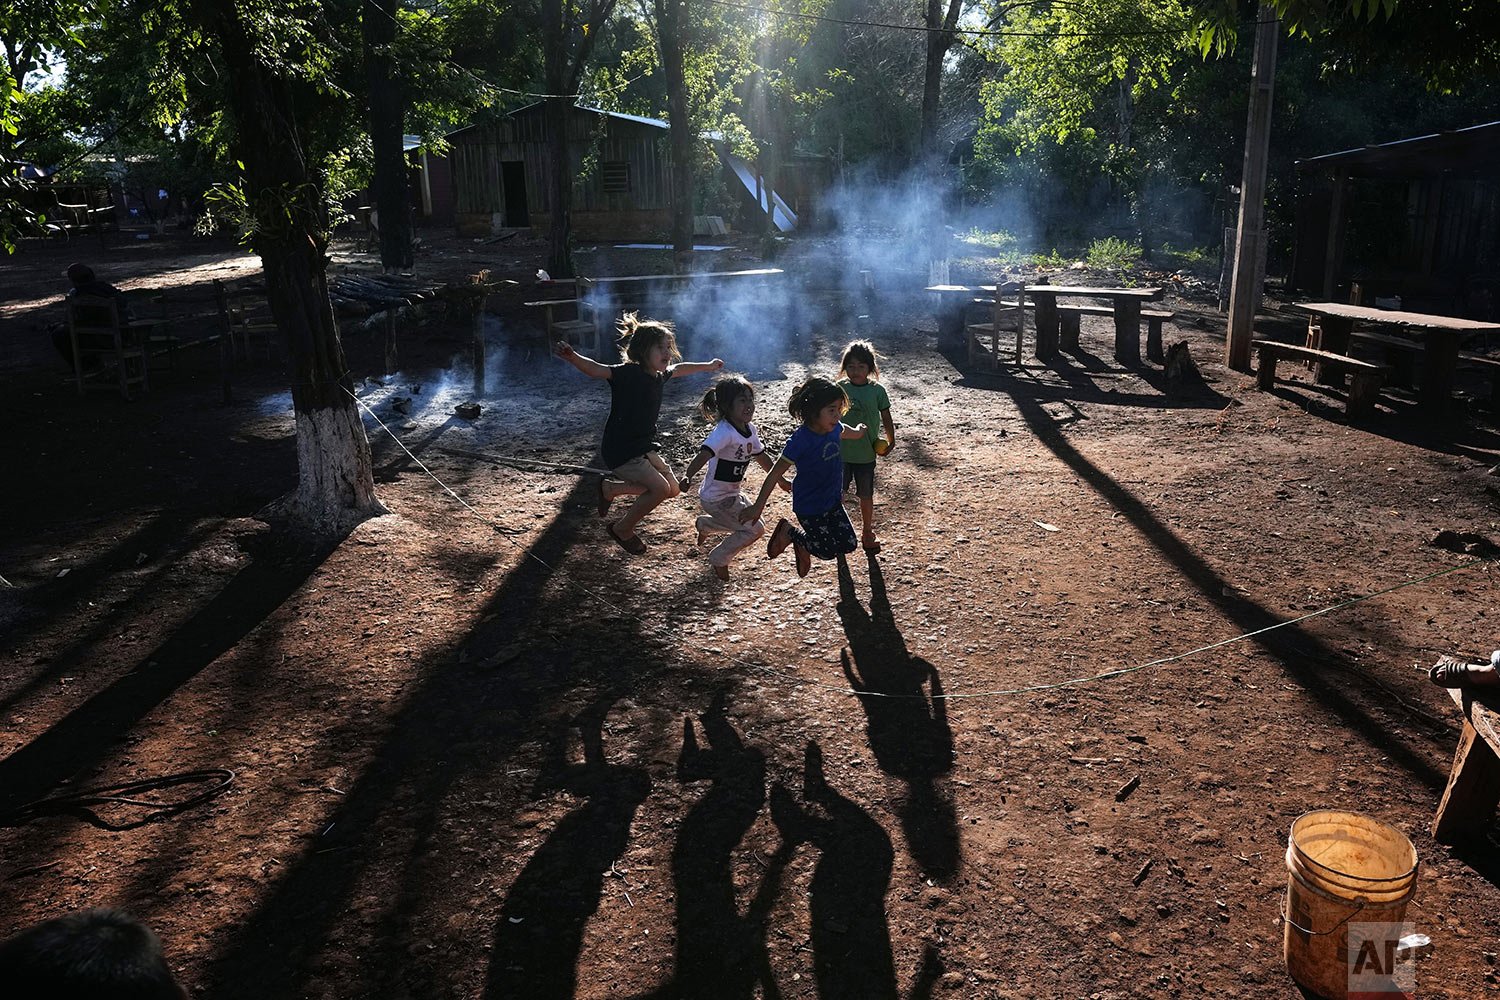  Children jump rope in the Ache Indigenous town of Puerto Barra during celebrations marking the town's 45th anniversary, in the Alto Parana department of Paraguay, Oct. 24, 2021. The town's original inhabitants left their jungle community, Naranjal, 